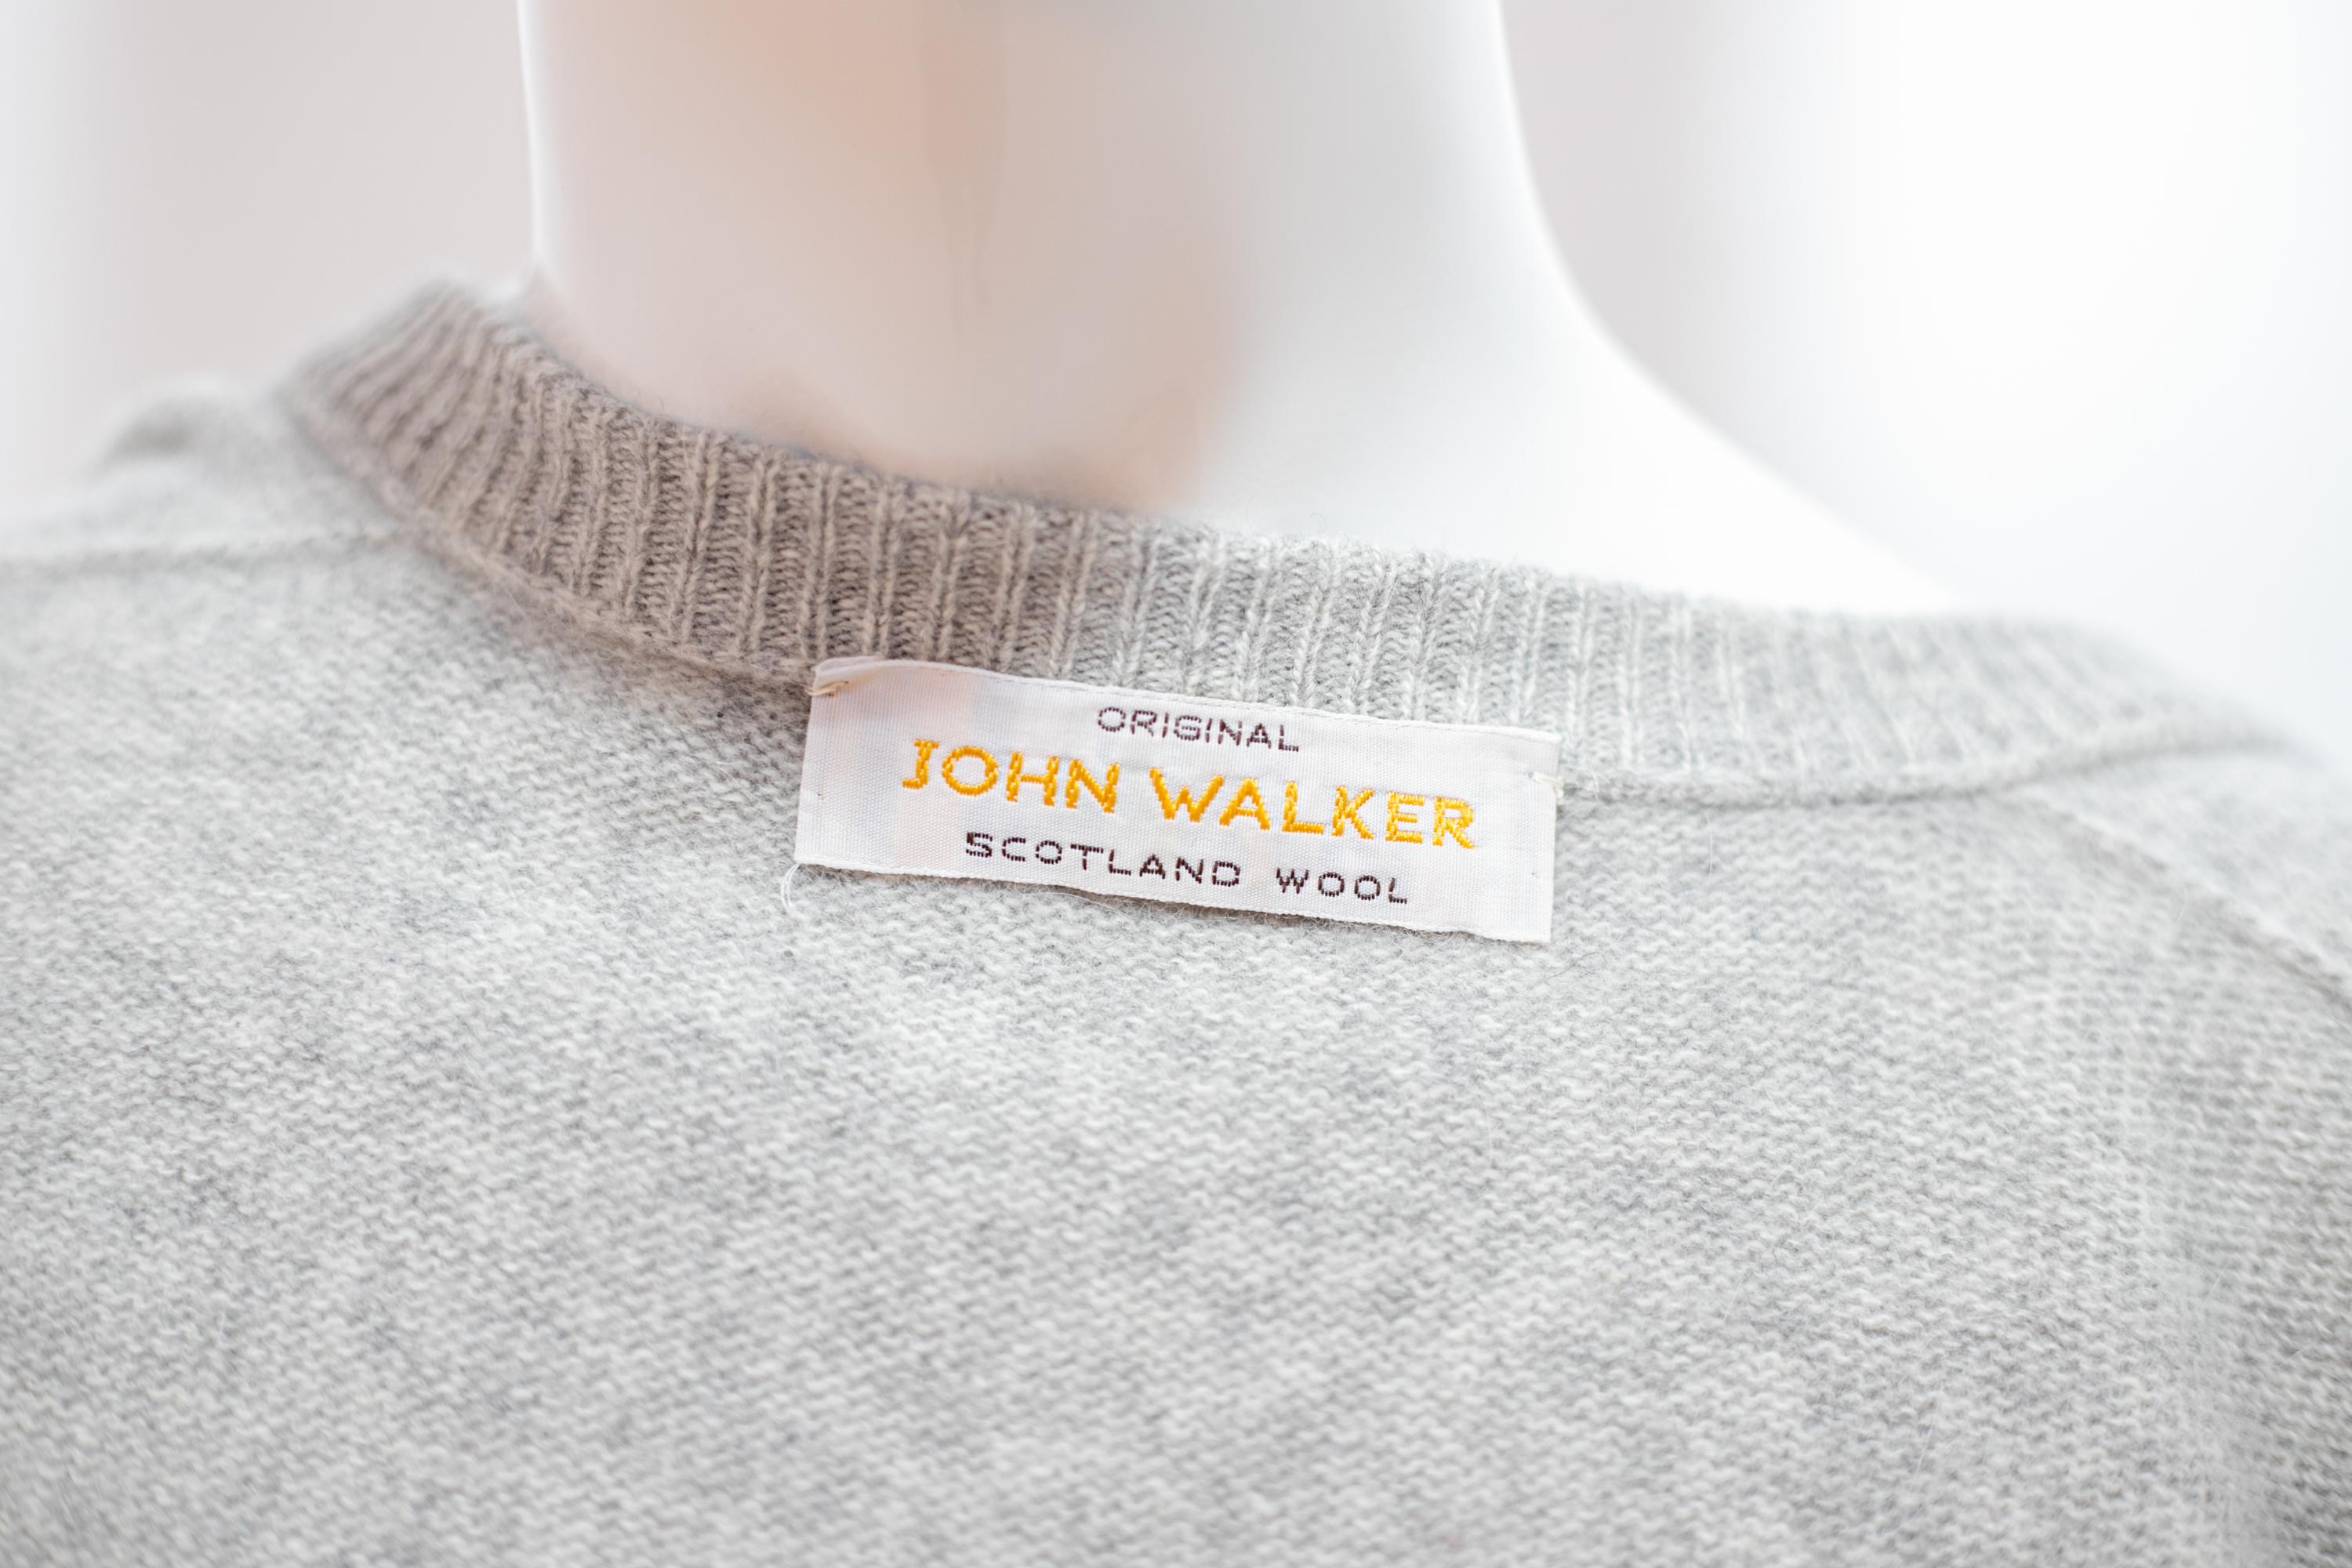 Beautiful wool sweater designed by John Walker in the 1990s, made in Scotland.
The sweater is made entirely of gray Scottish wool, with long sleeves and narrower cuffs.
The sweater has a classic U-shaped collar, in the center we see 7 round golden